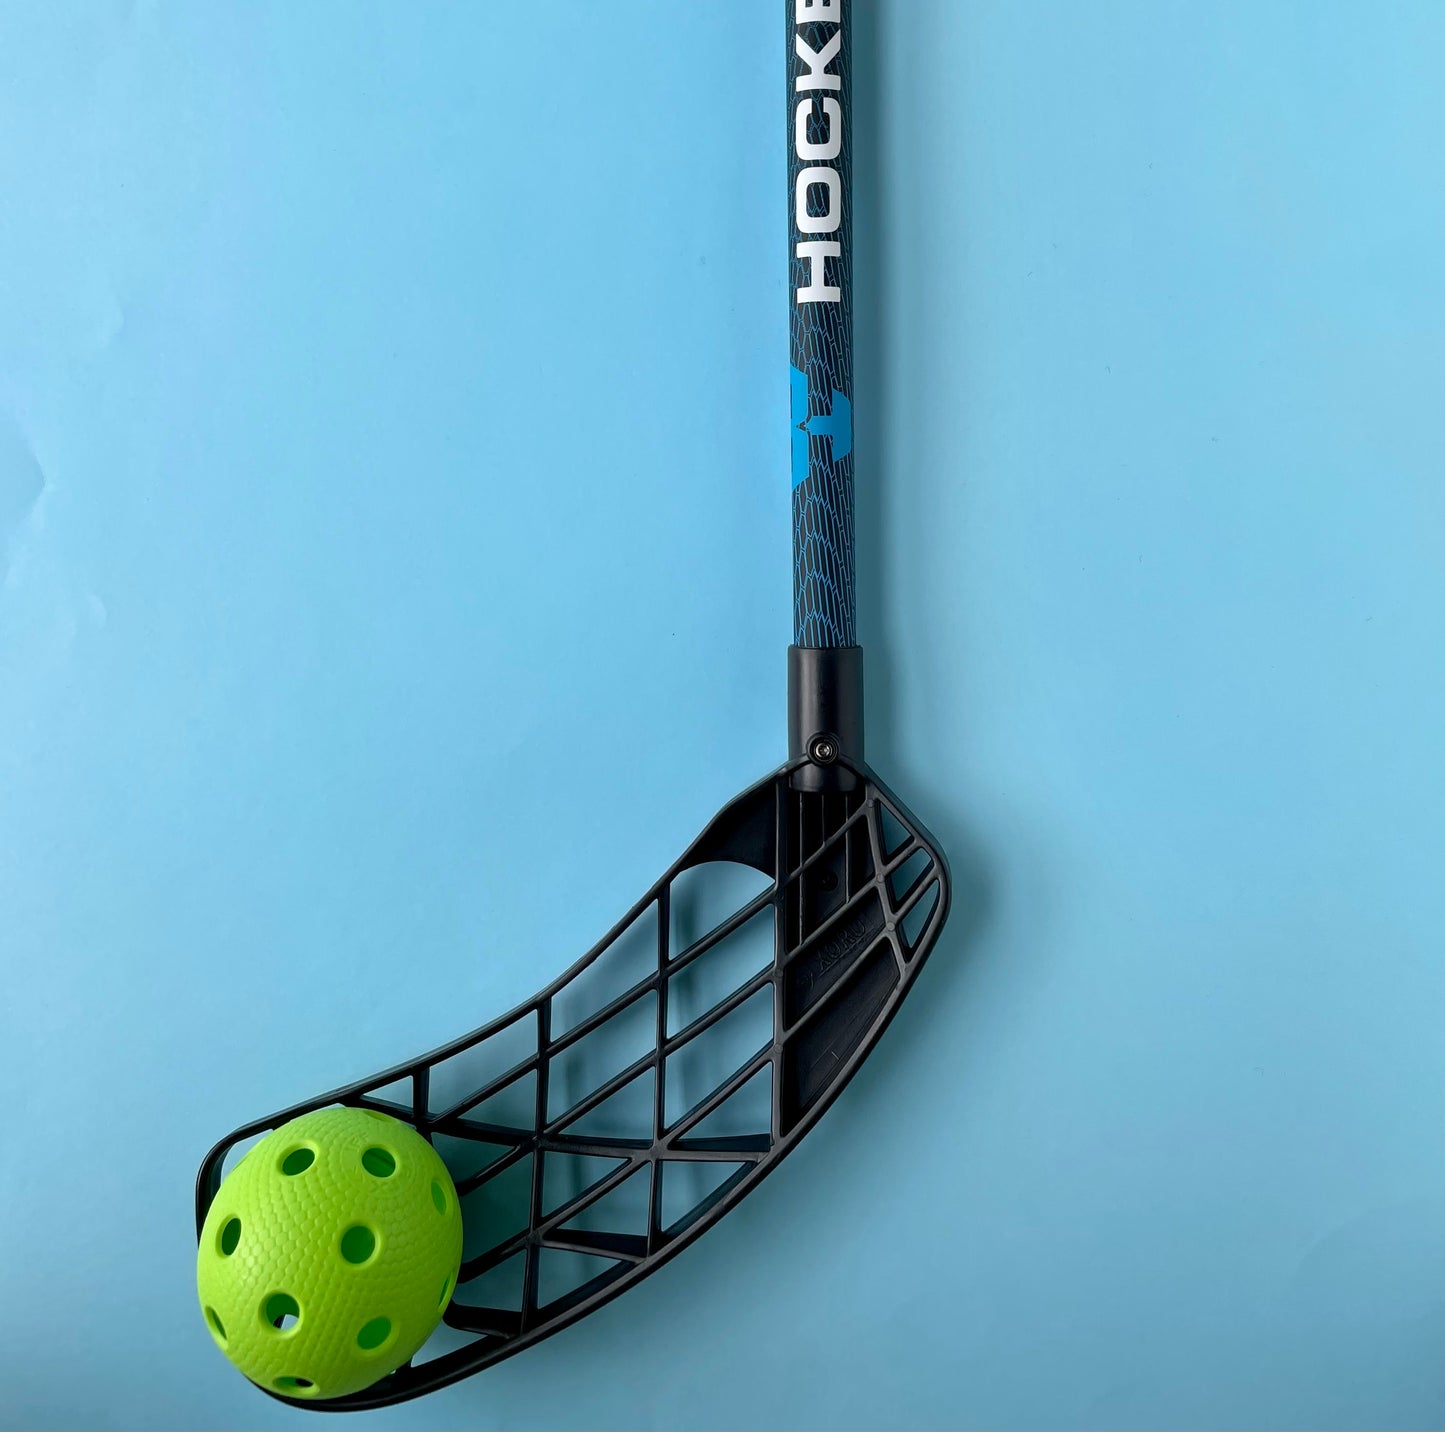 Hockeyball kinetic-shaft blue stick with ball topdown view